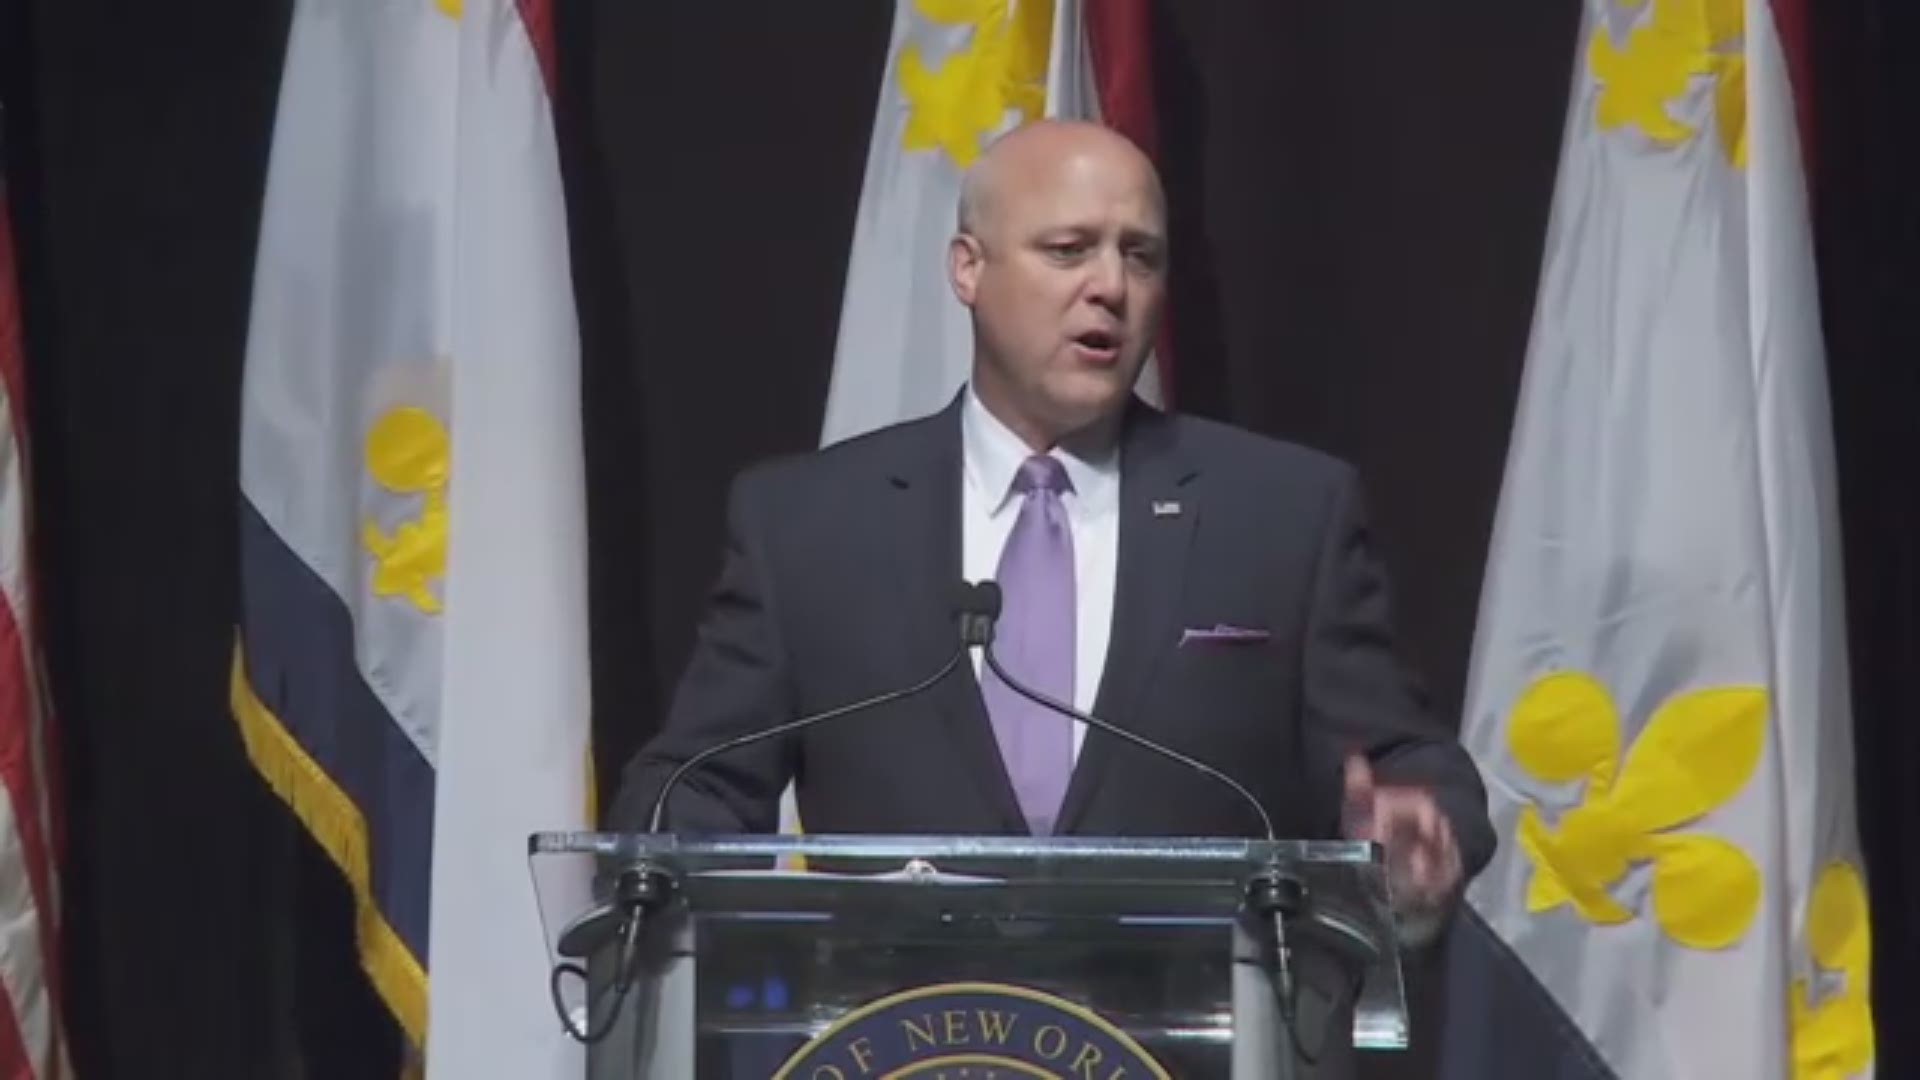 Mayor Landrieu tells the story of two children affected by violence during a address about crime at Tulane University on April 27.